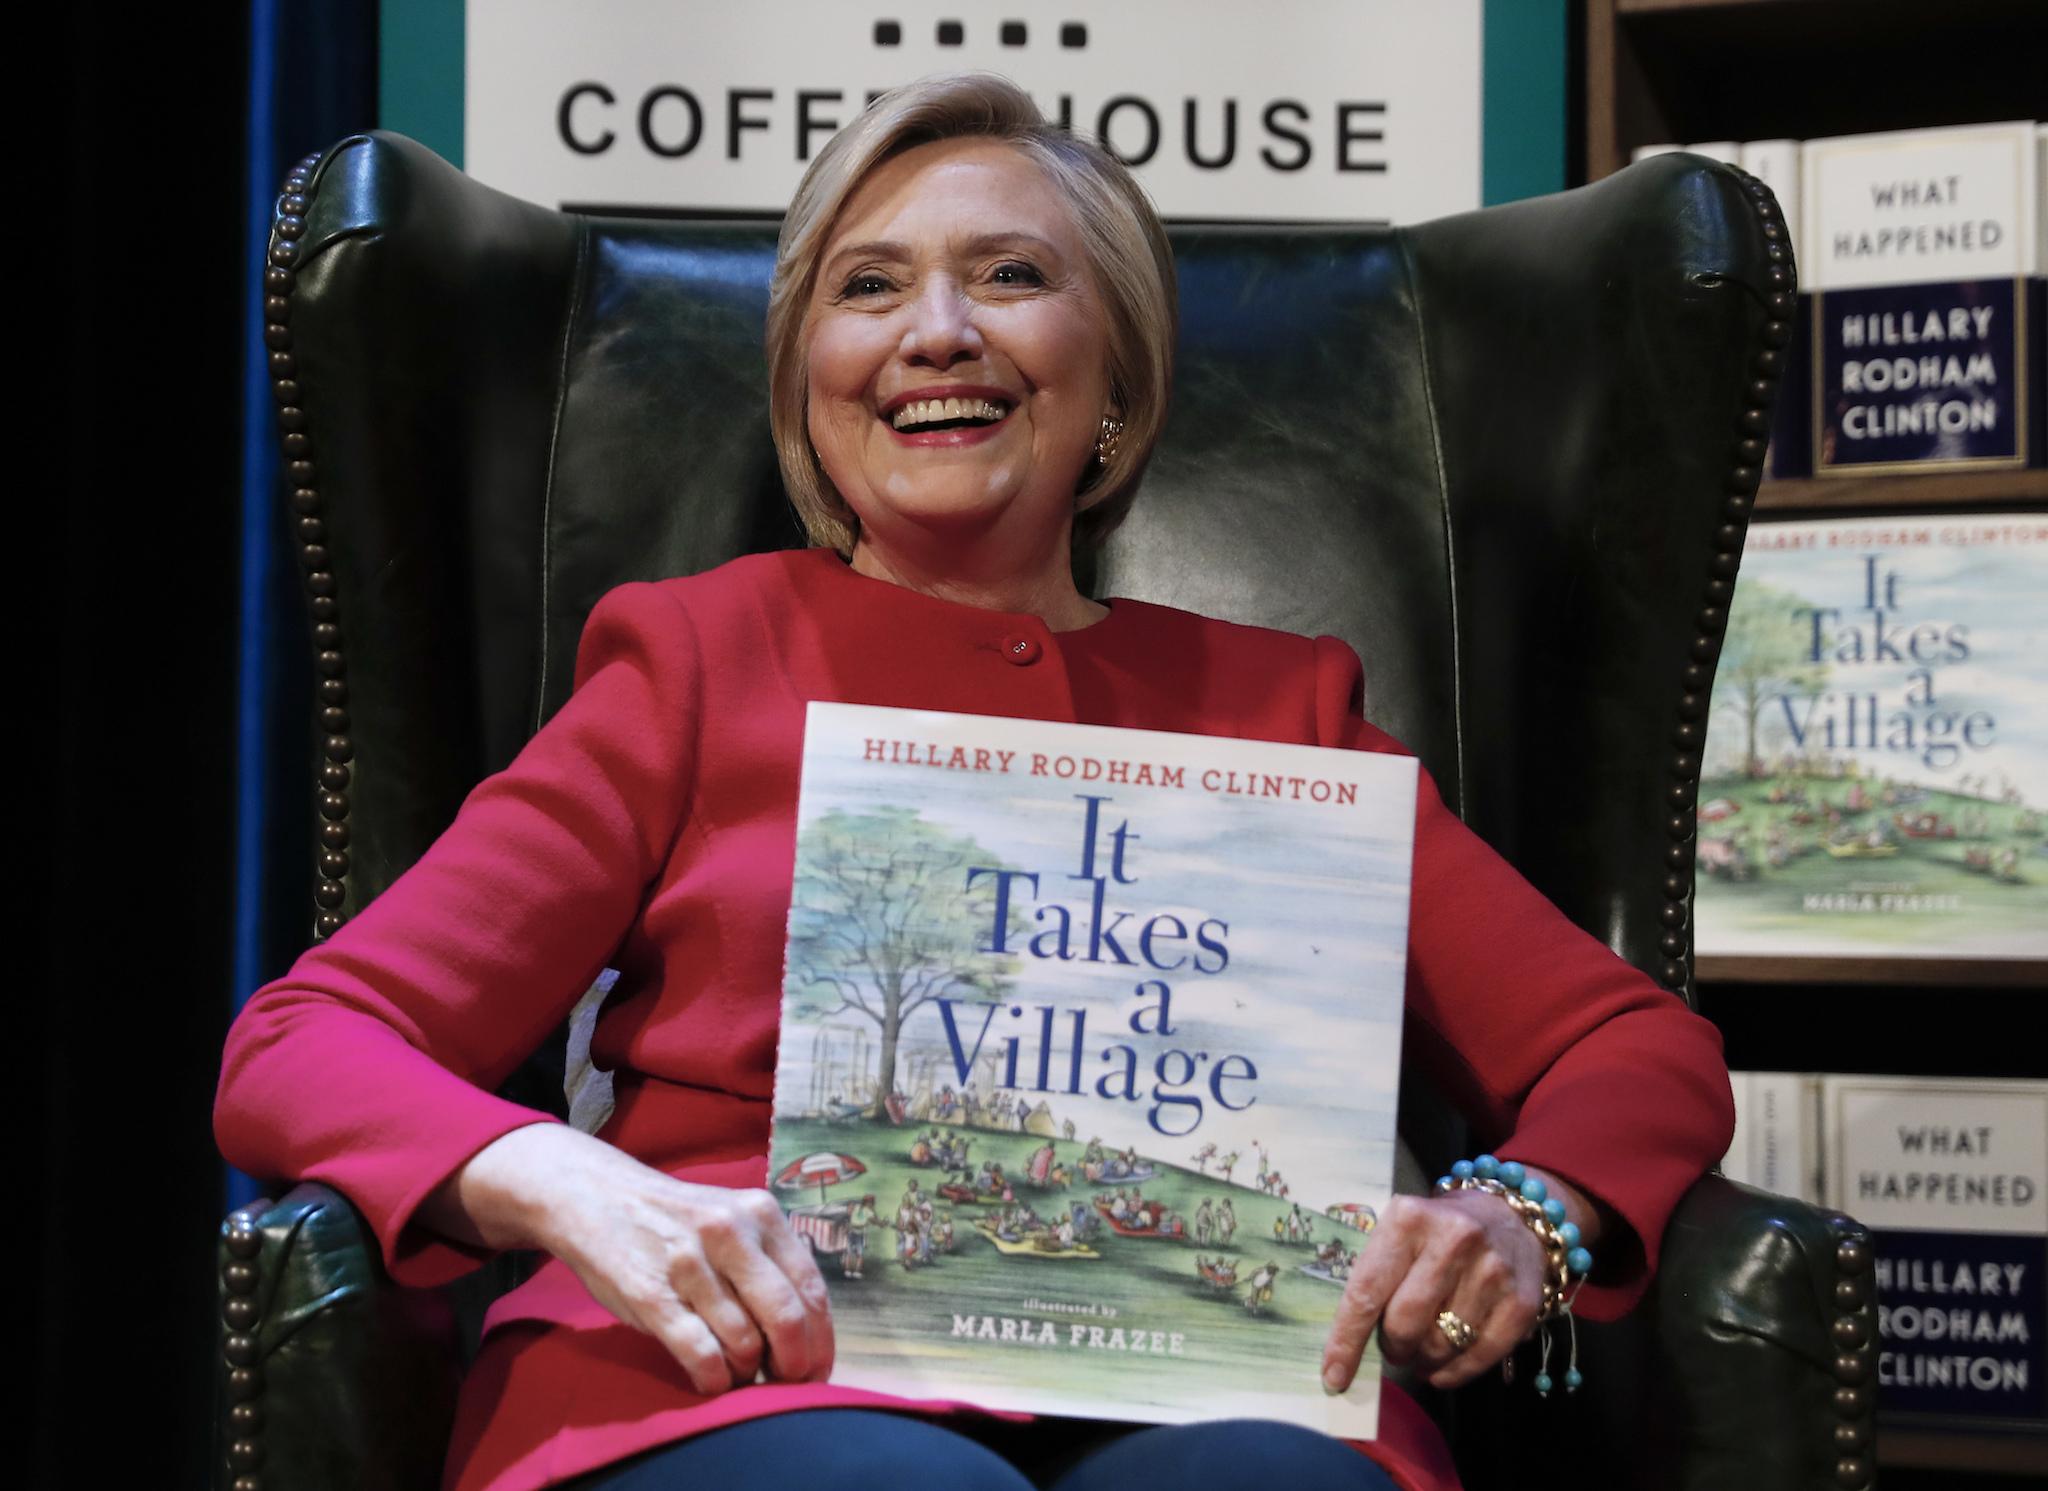 Hillary Clinton, holding her book "It Takes A Village"